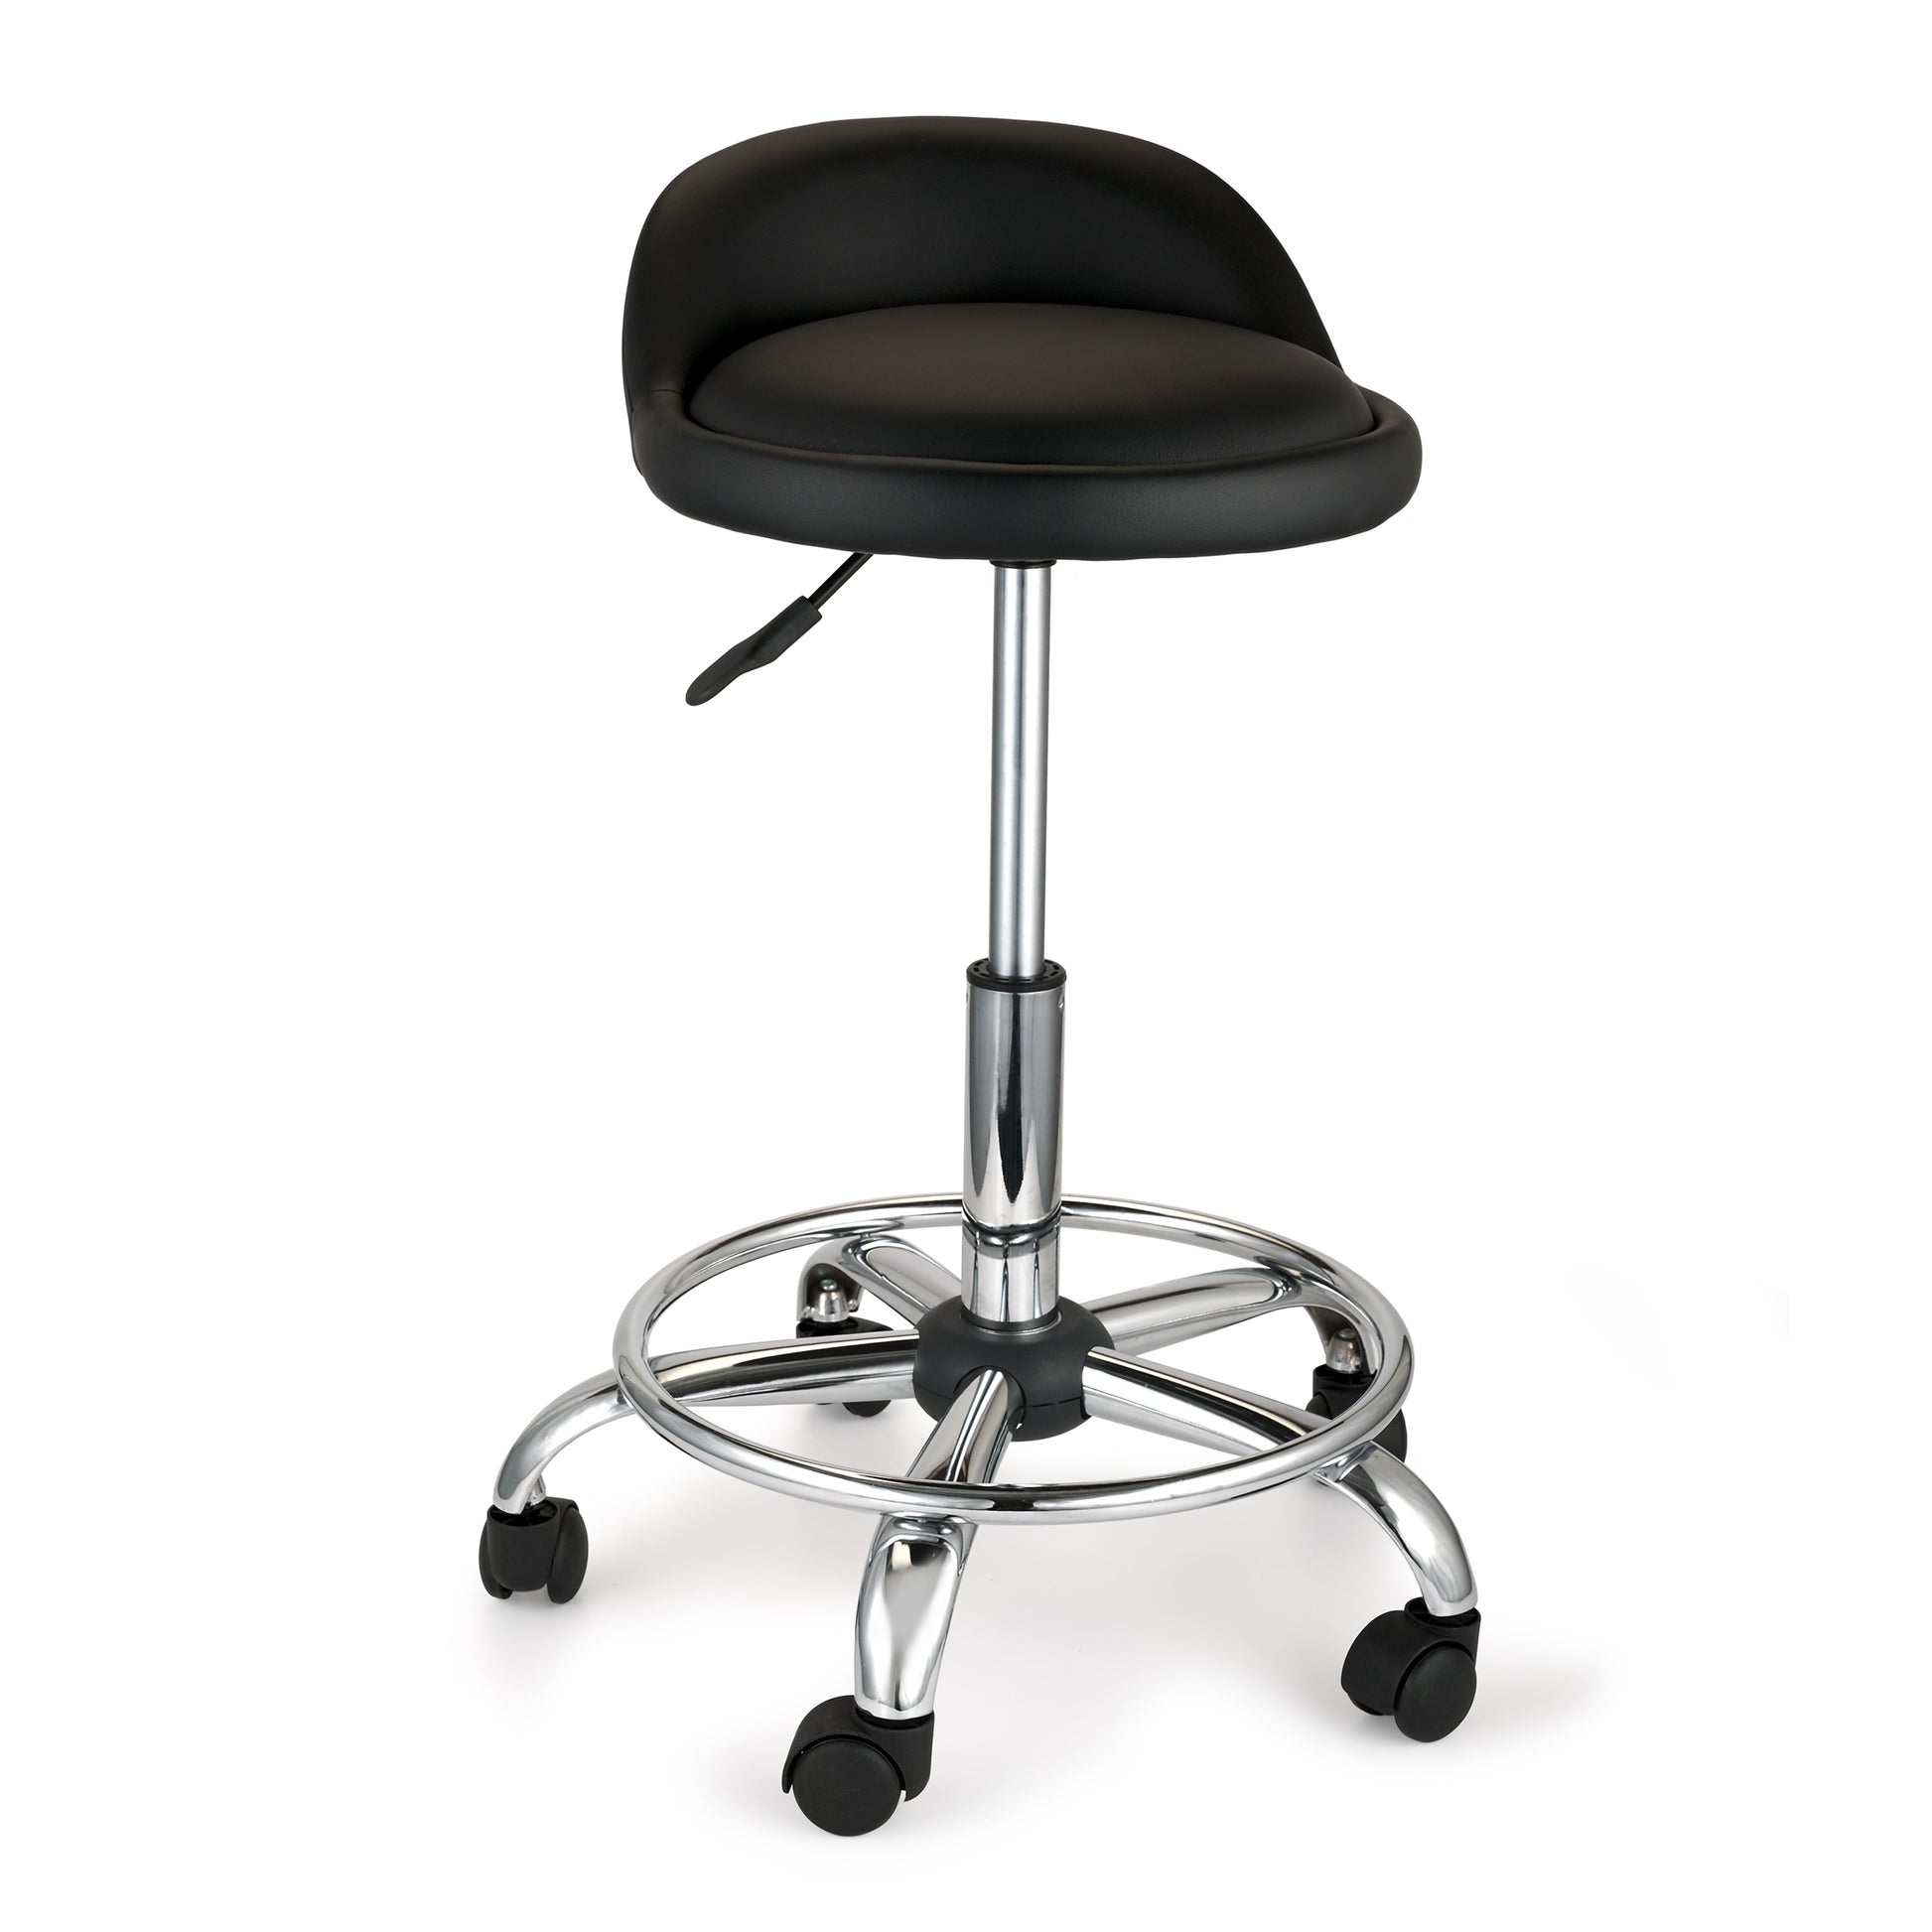 Adjustable Height Shop Stool with Casters and Feet alt 0